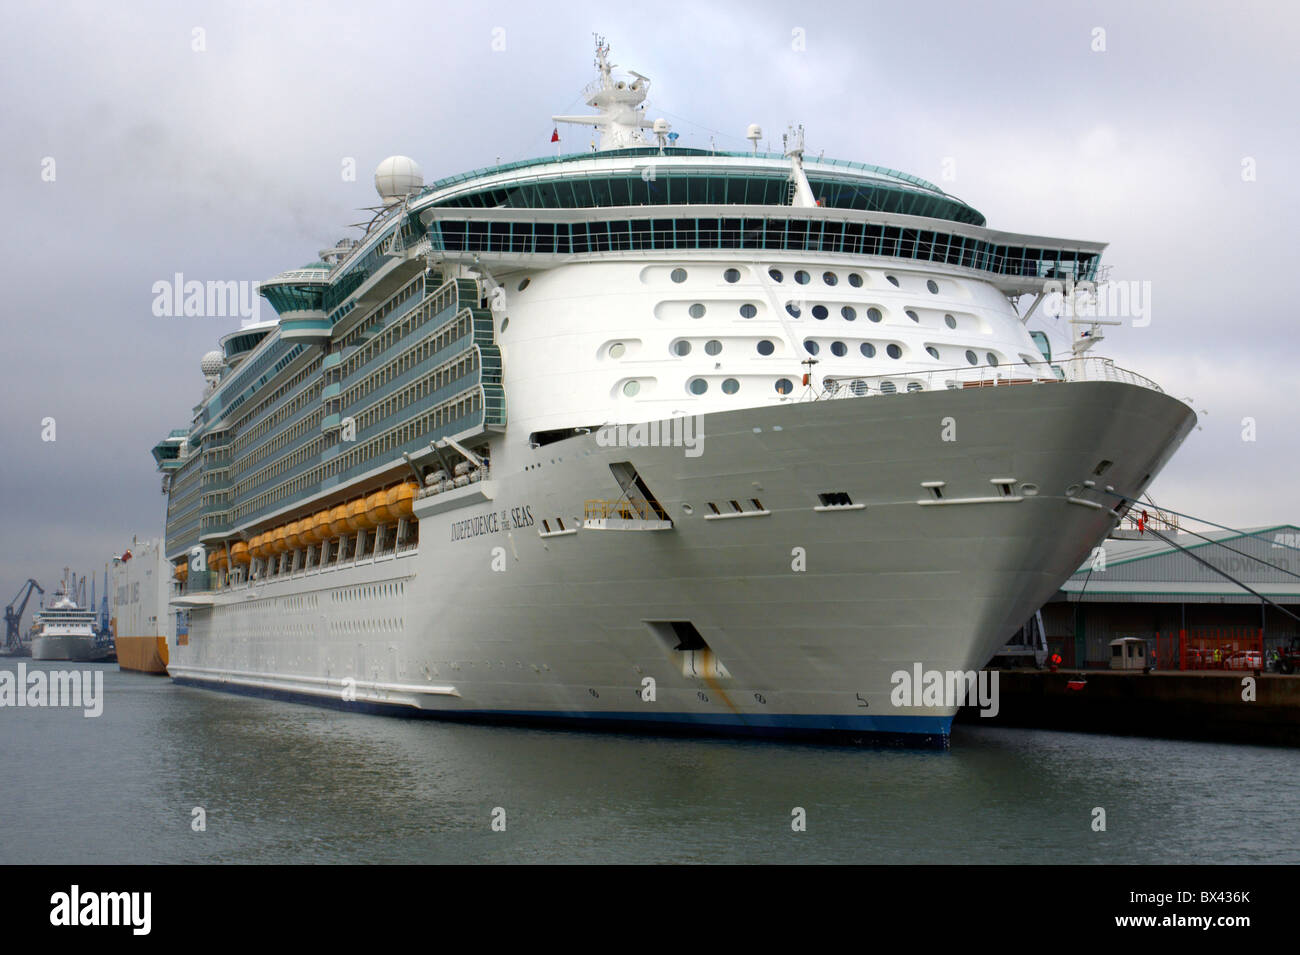 INDEPENDENCE OF THE SEAS  (INTERCRUISES) 101 BIRTHED AT SOUTHAMPTON DOCKS. Stock Photo